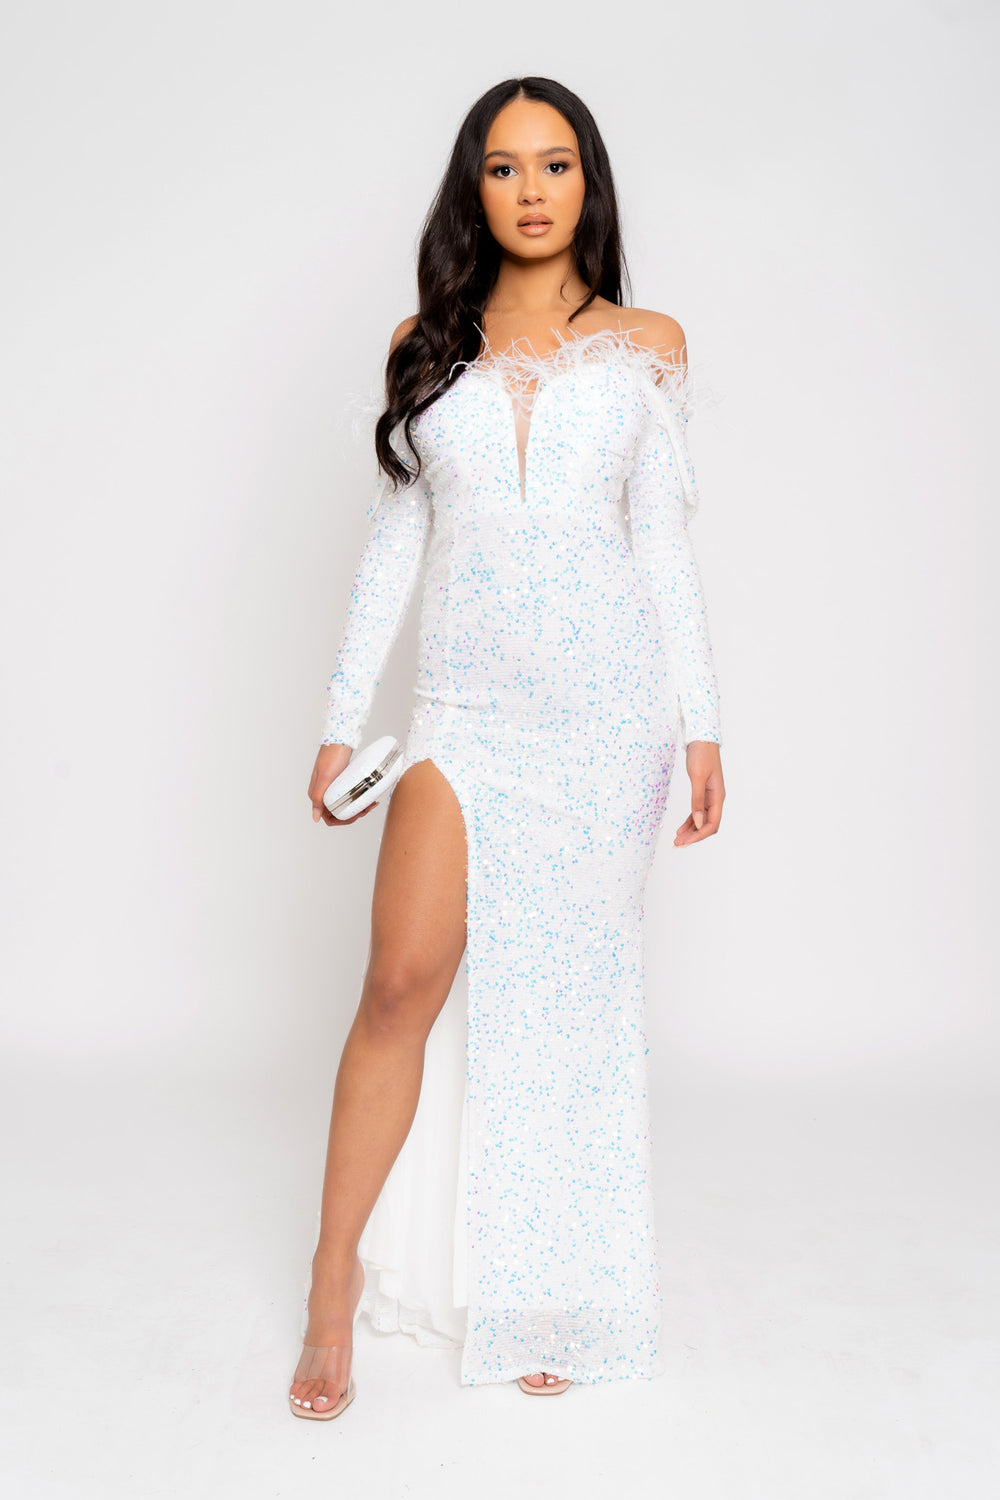 Eternity White VIP Luxe Feather Off The Shoulder Sequin Long Sleeve Split Maxi Dress